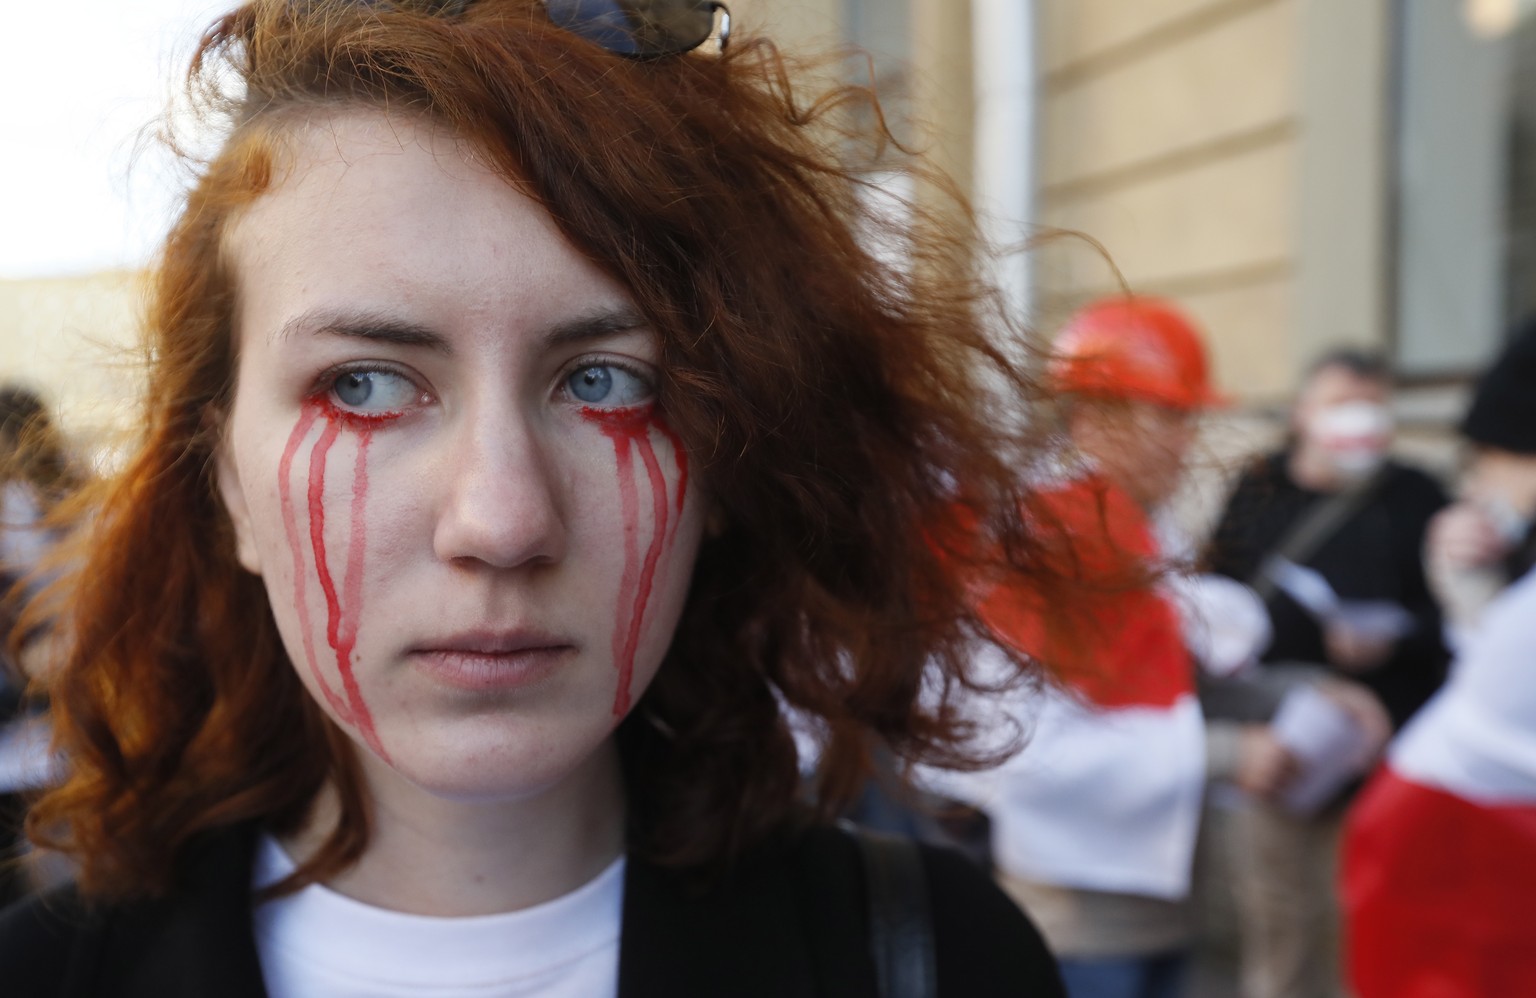 epa08681821 A young woman painted tears in colors of the historic Belarusian flag on her face as she attends a rally in solidarity with the Belarusian people, following recent protests to reject the p ...